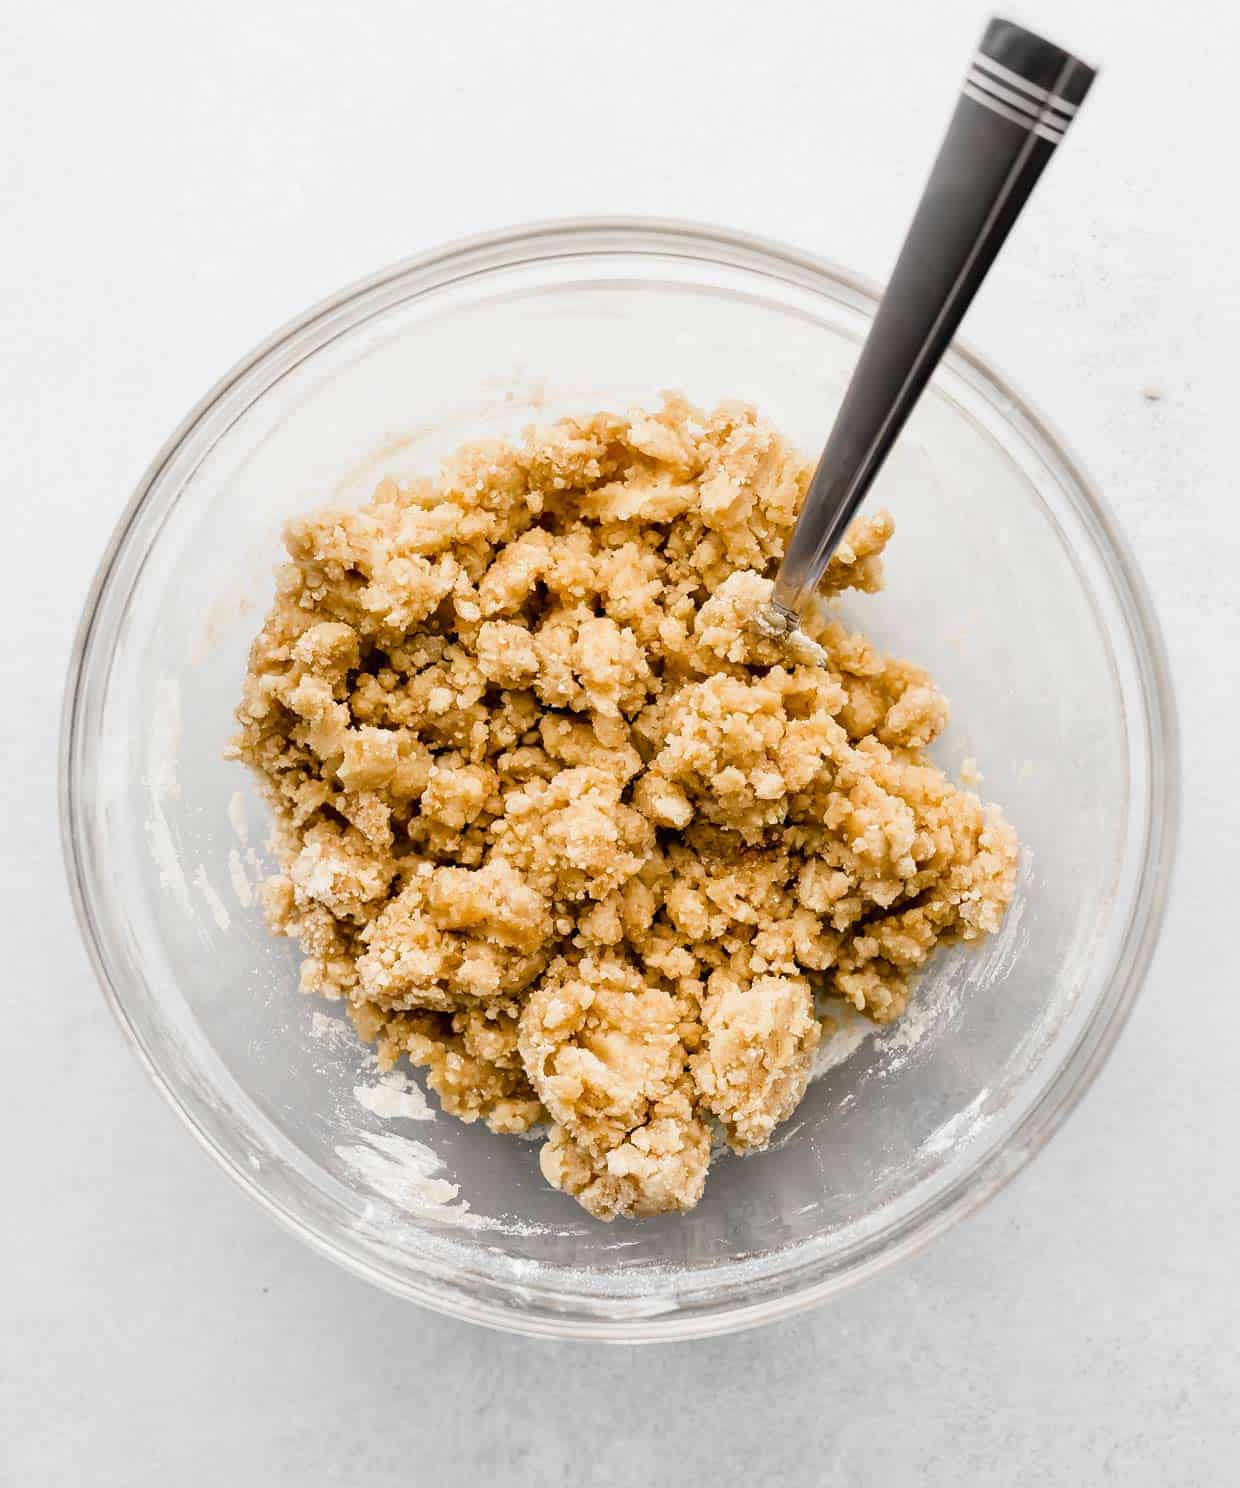 A crumbly crumb topping in a glass bowl on a white background.